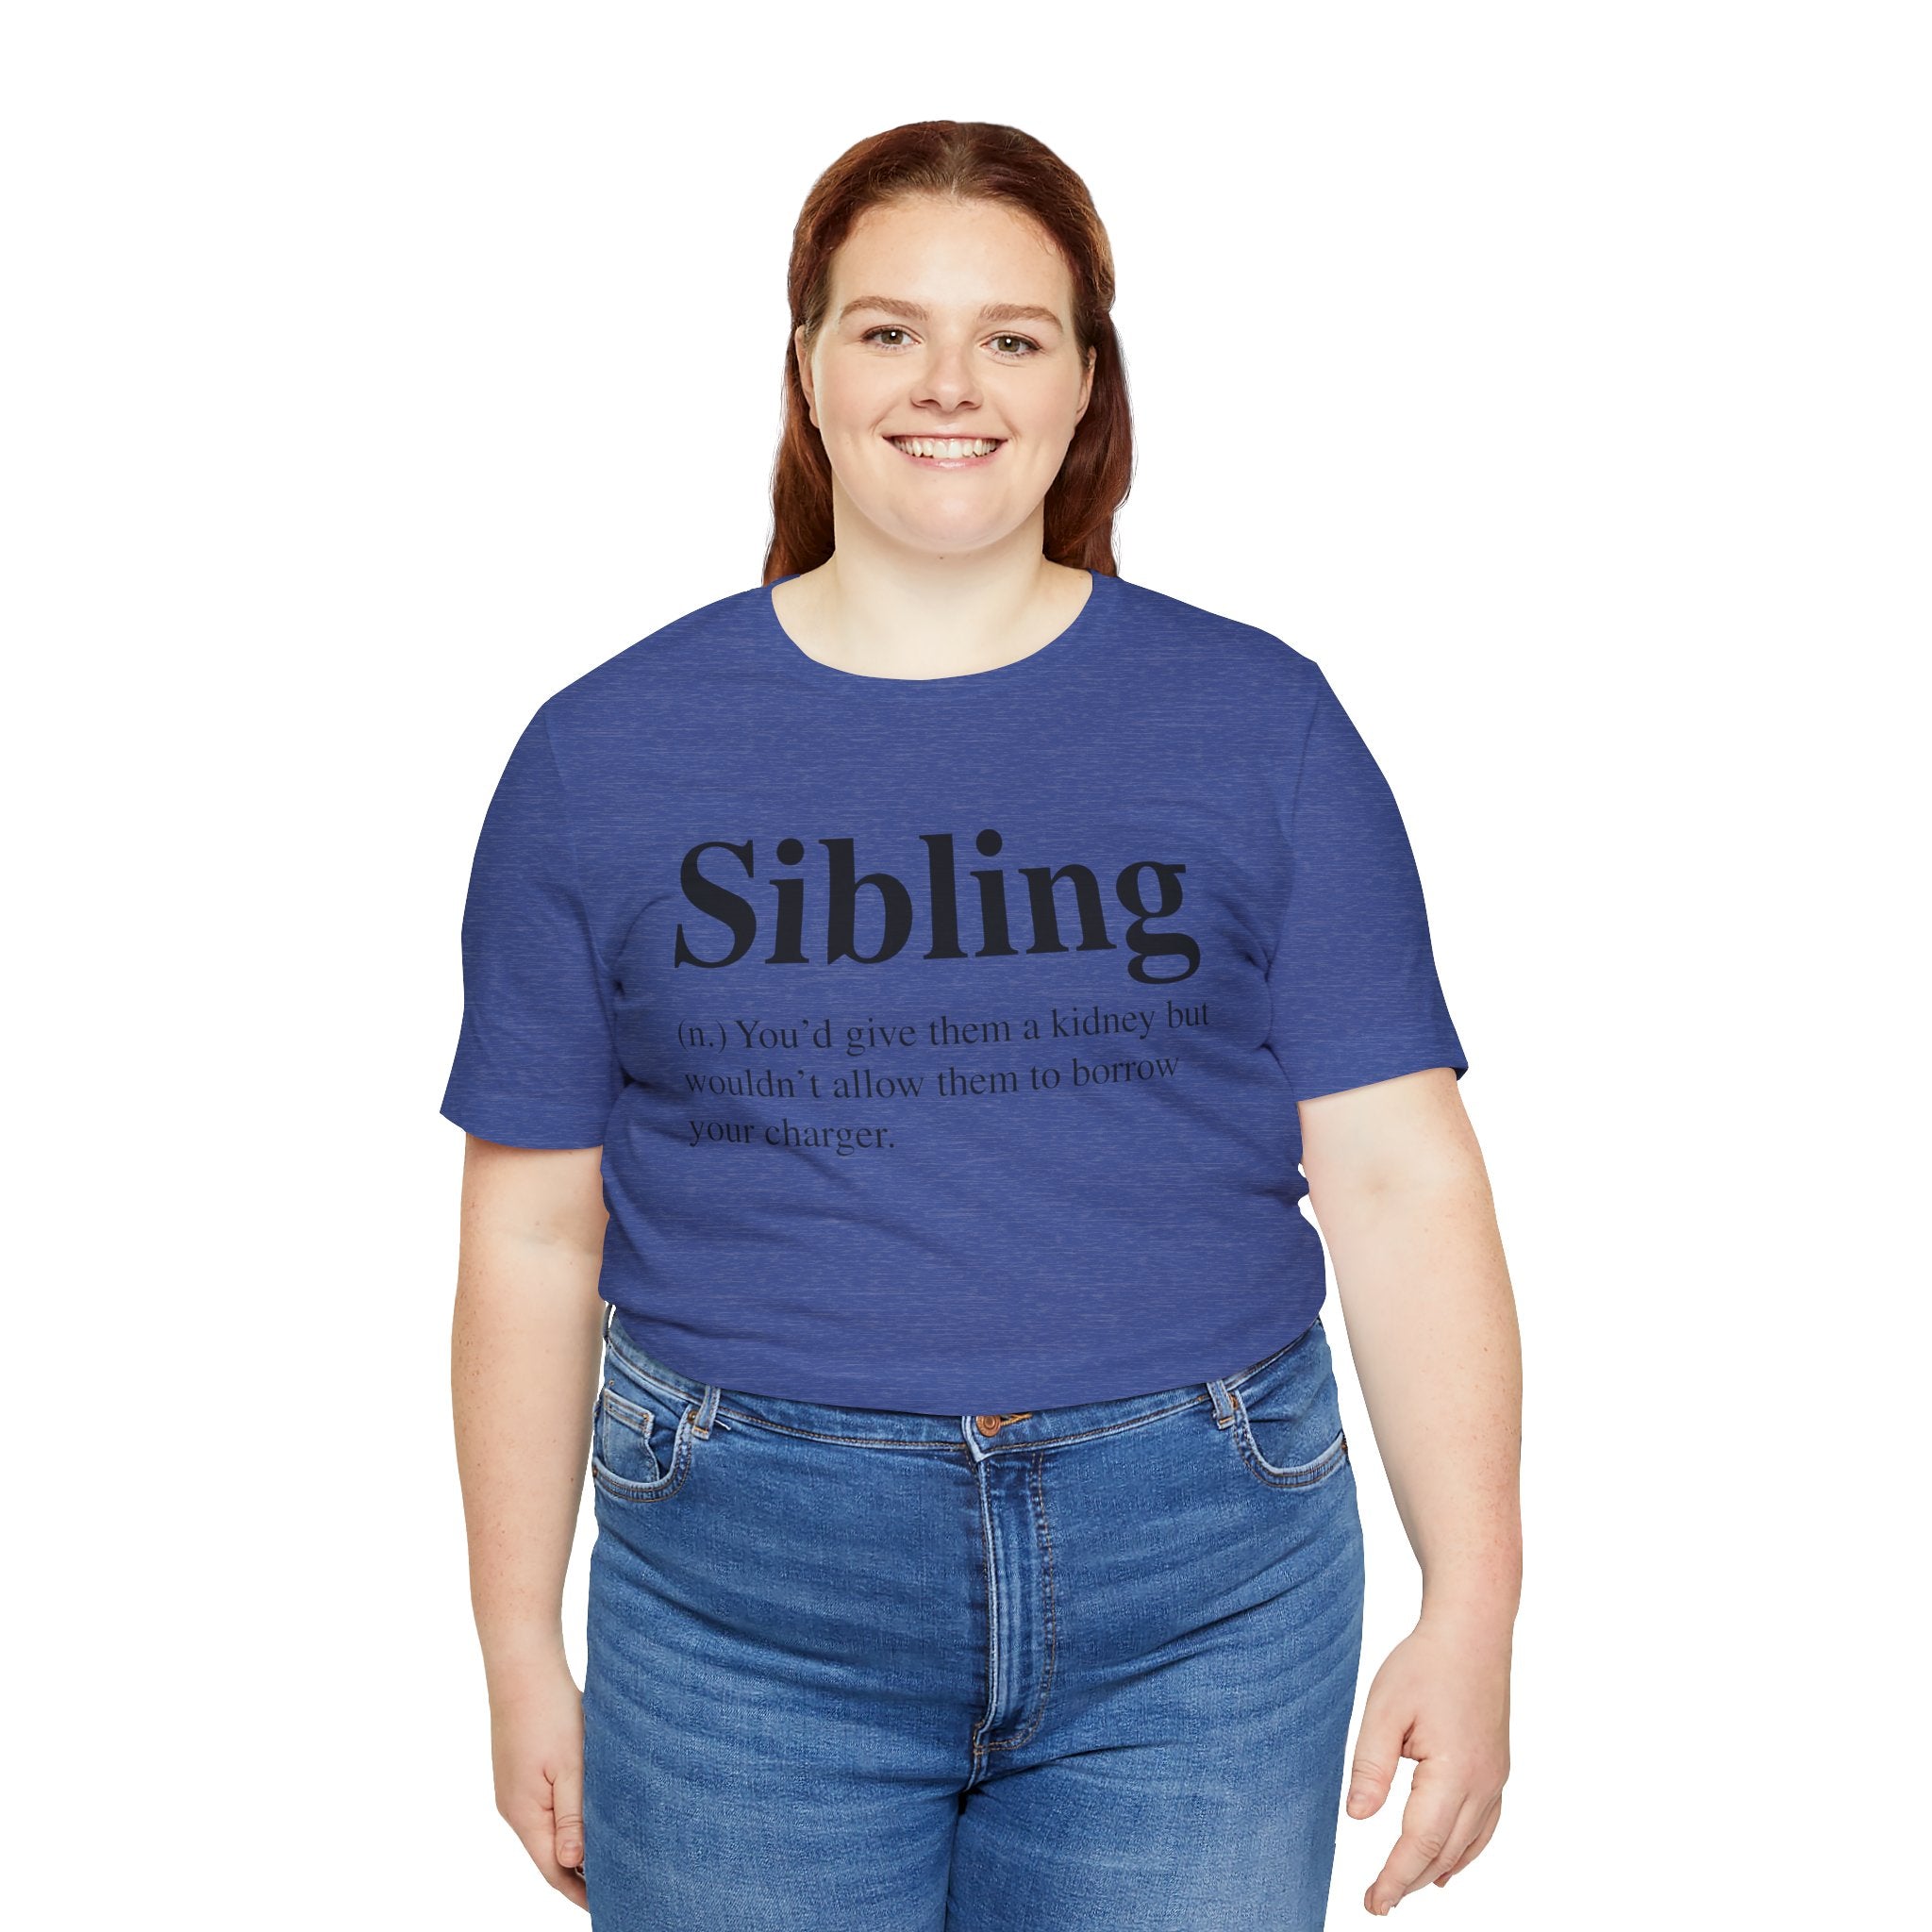 Woman in a soft cotton blue Sibling T-Shirt with the word "sibling" and a humorous definition printed on it, smiling at the camera.